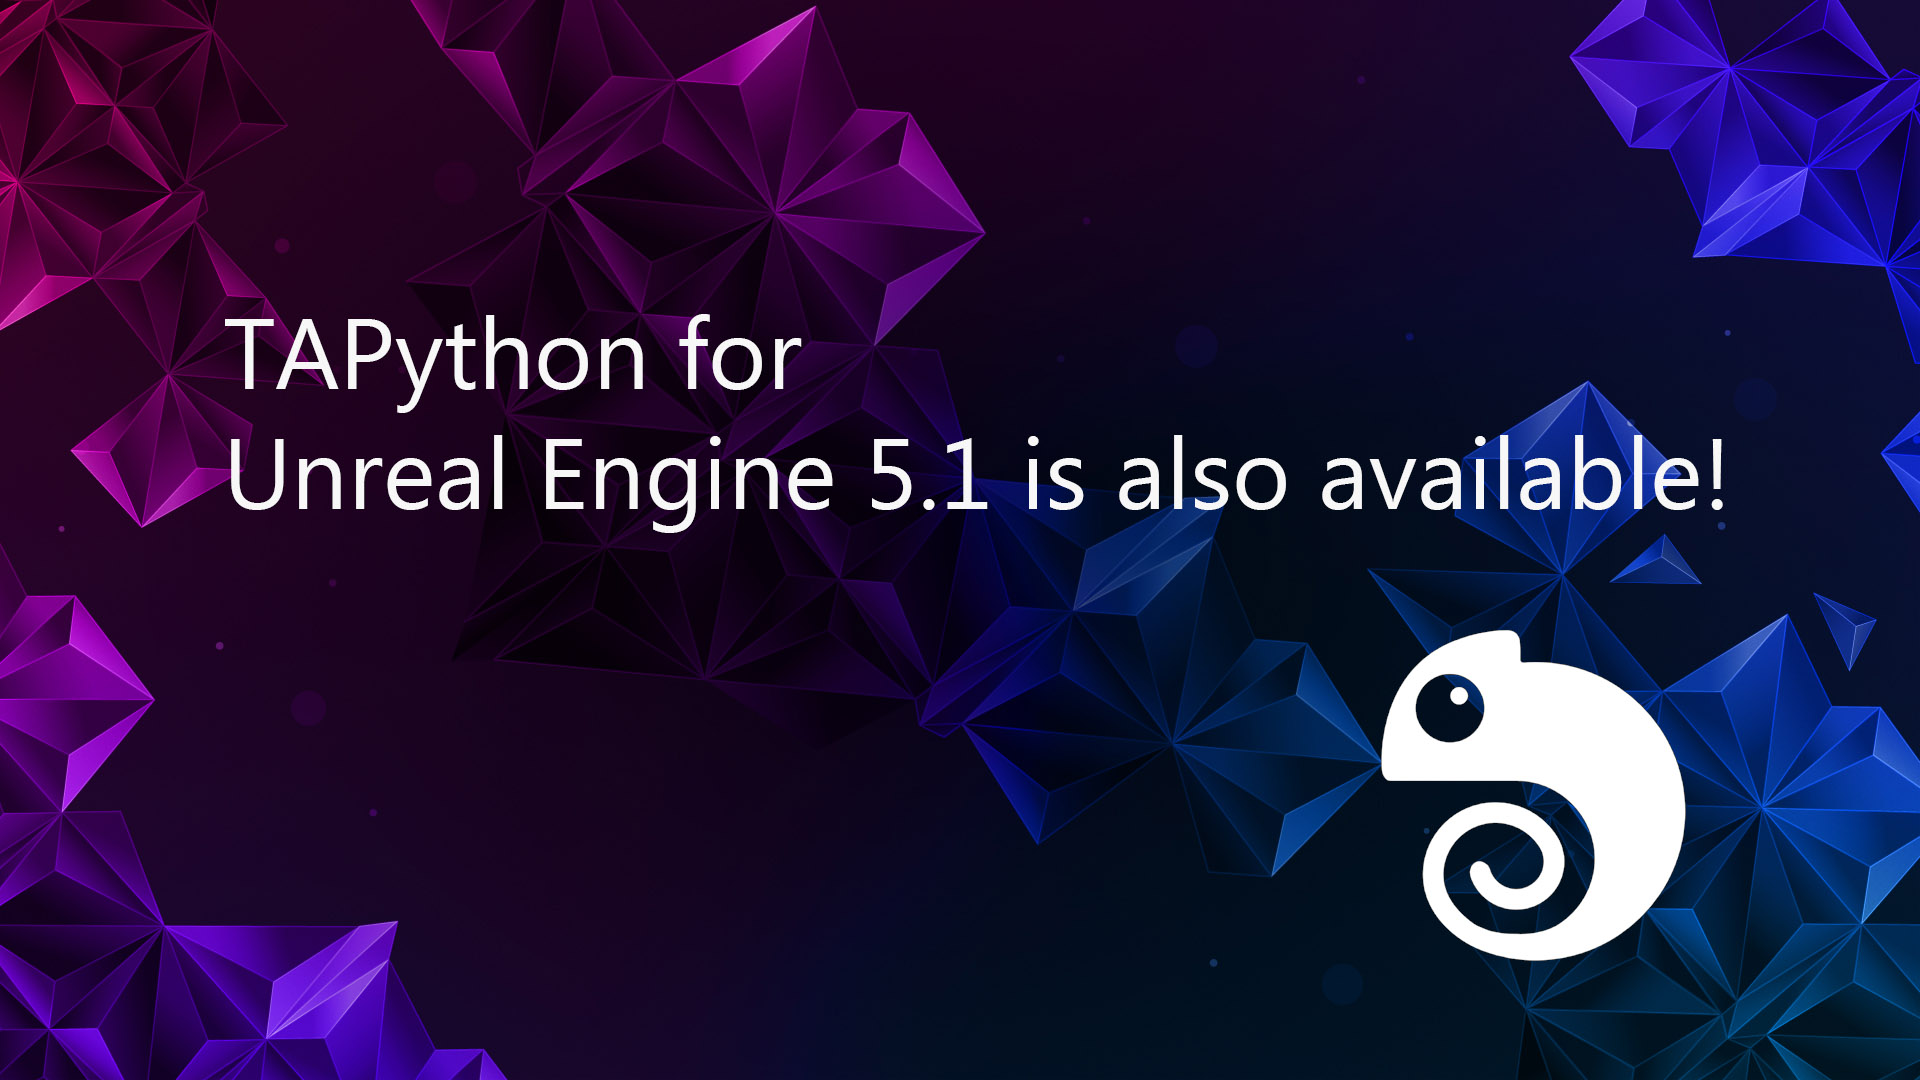 New TAPython for Unreal Engine 5.1